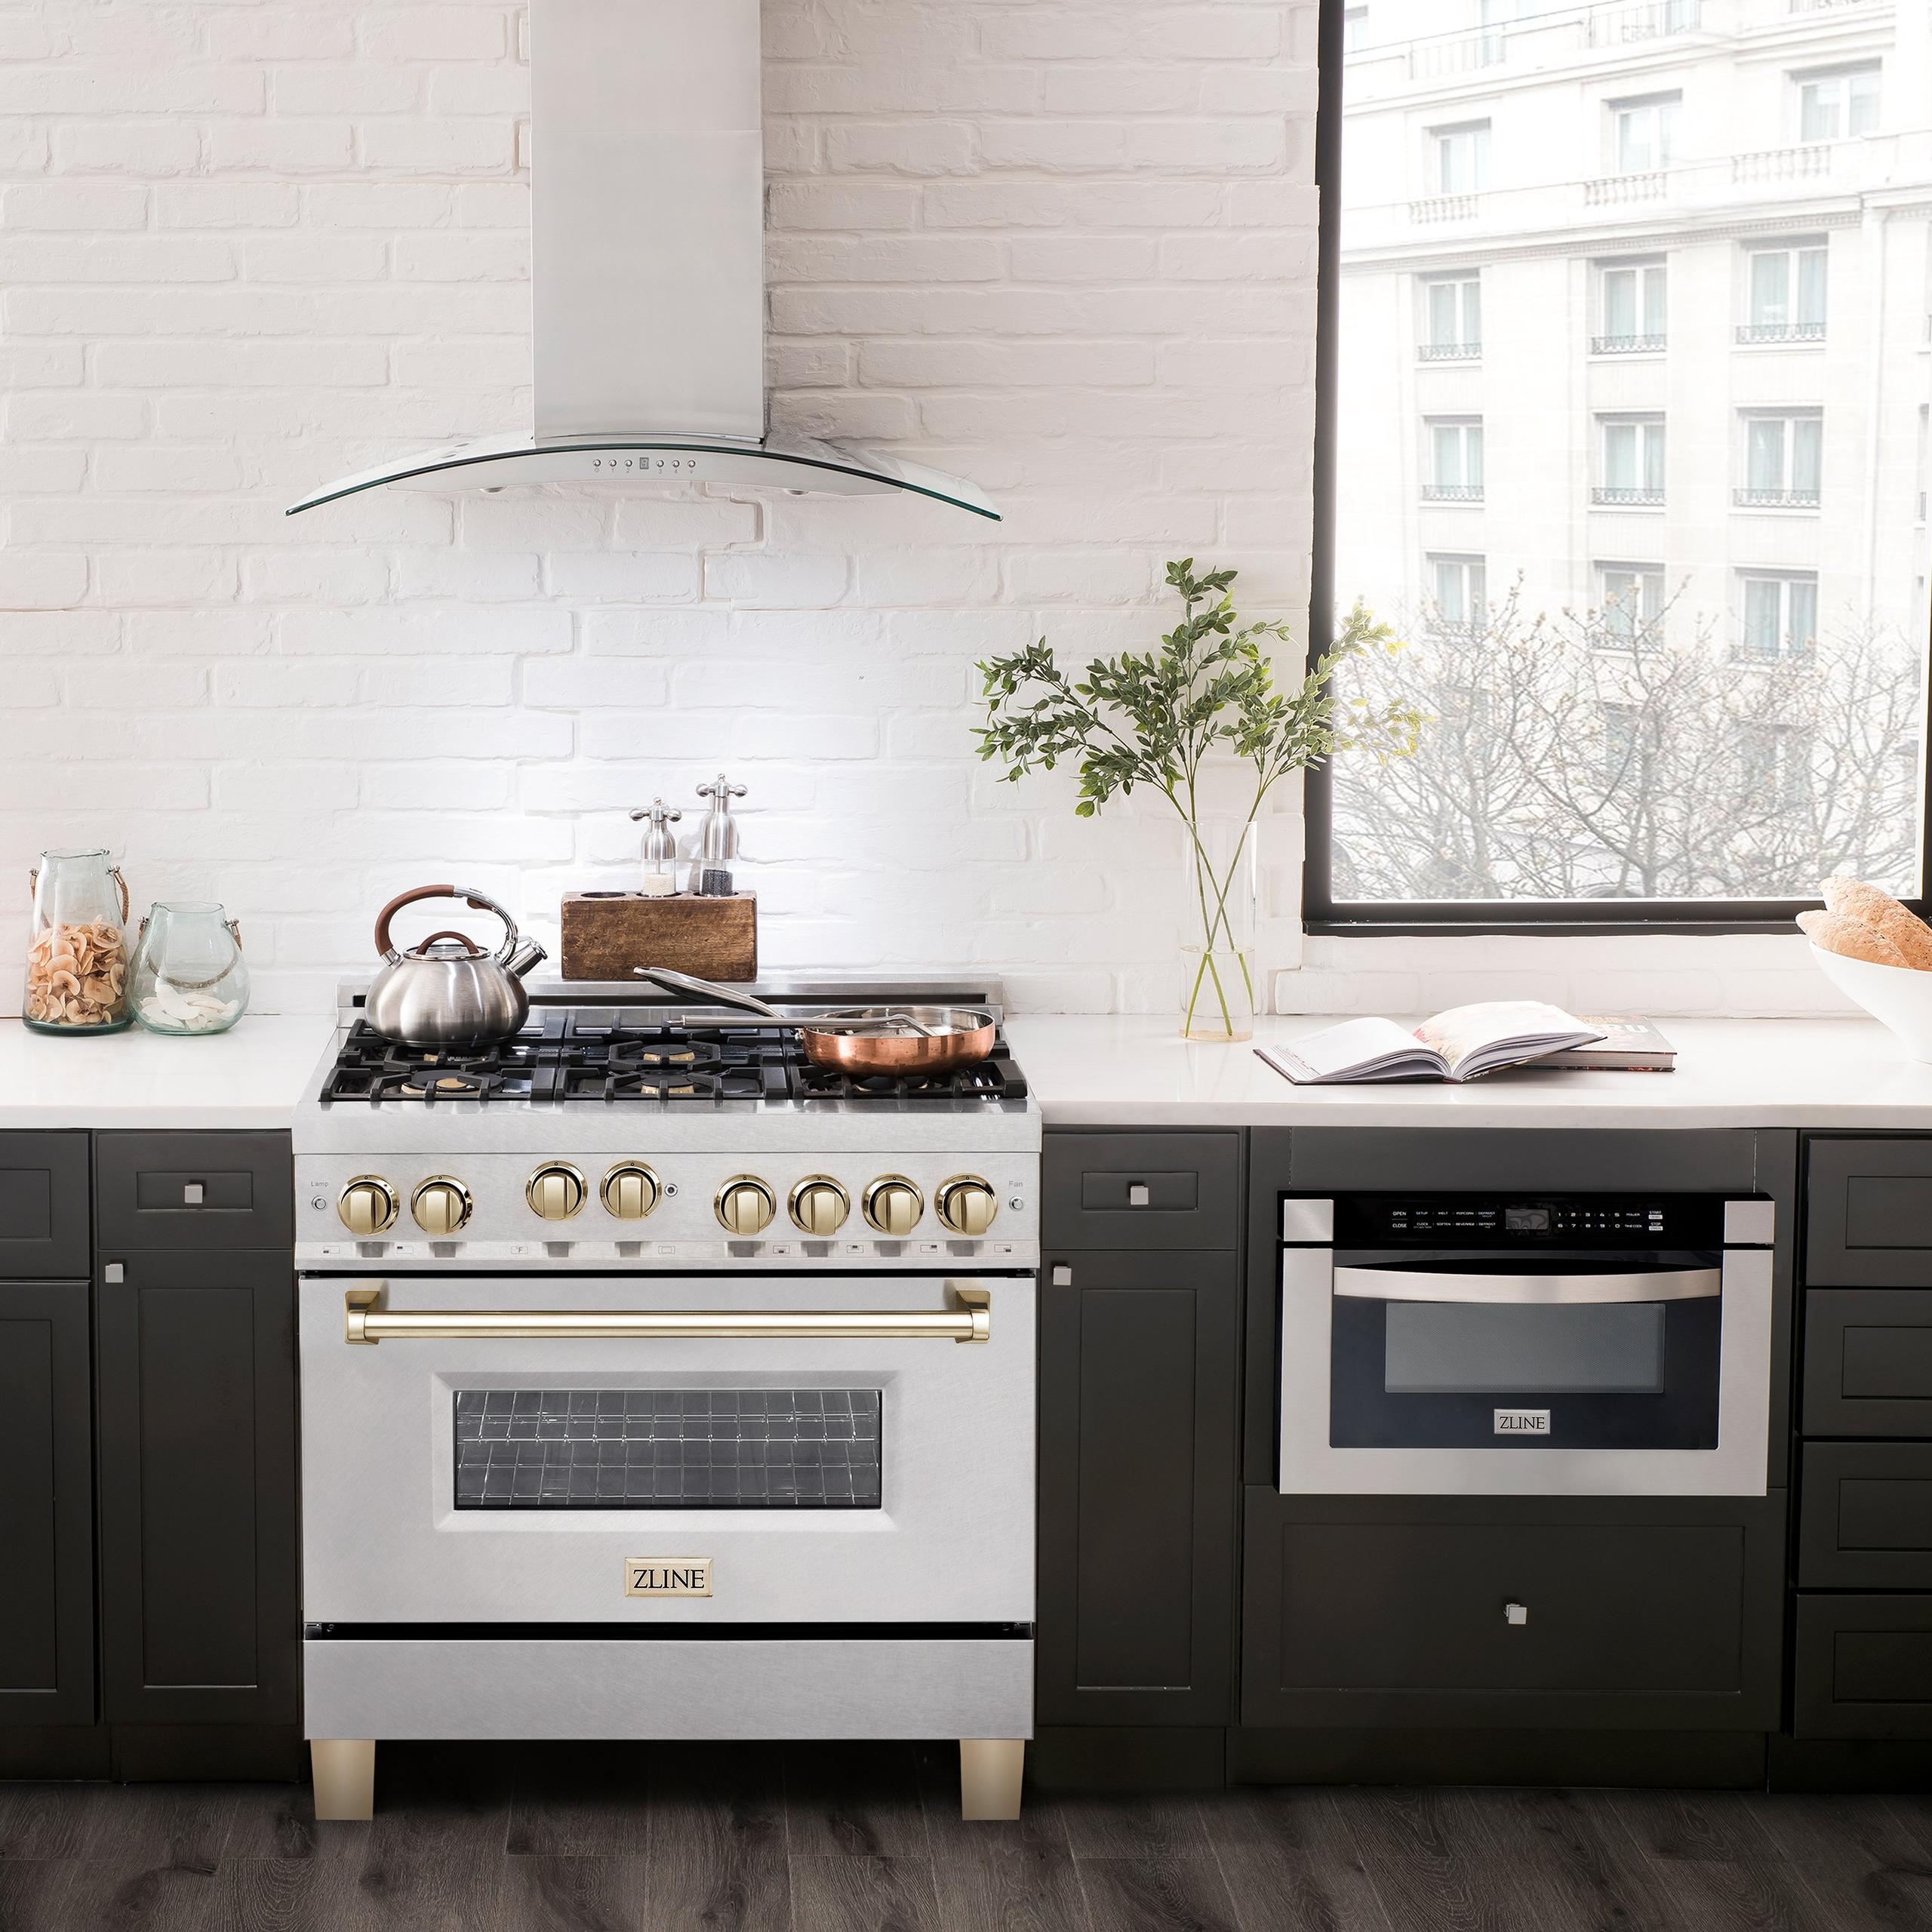 ZLINE KITCHEN AND BATH RGSZSN36MB ZLINE Autograph Edition 36" 4.6 cu. ft. Range with Gas Stove and Gas Oven in DuraSnow R Stainless Steel with Accents Color: Matte Black